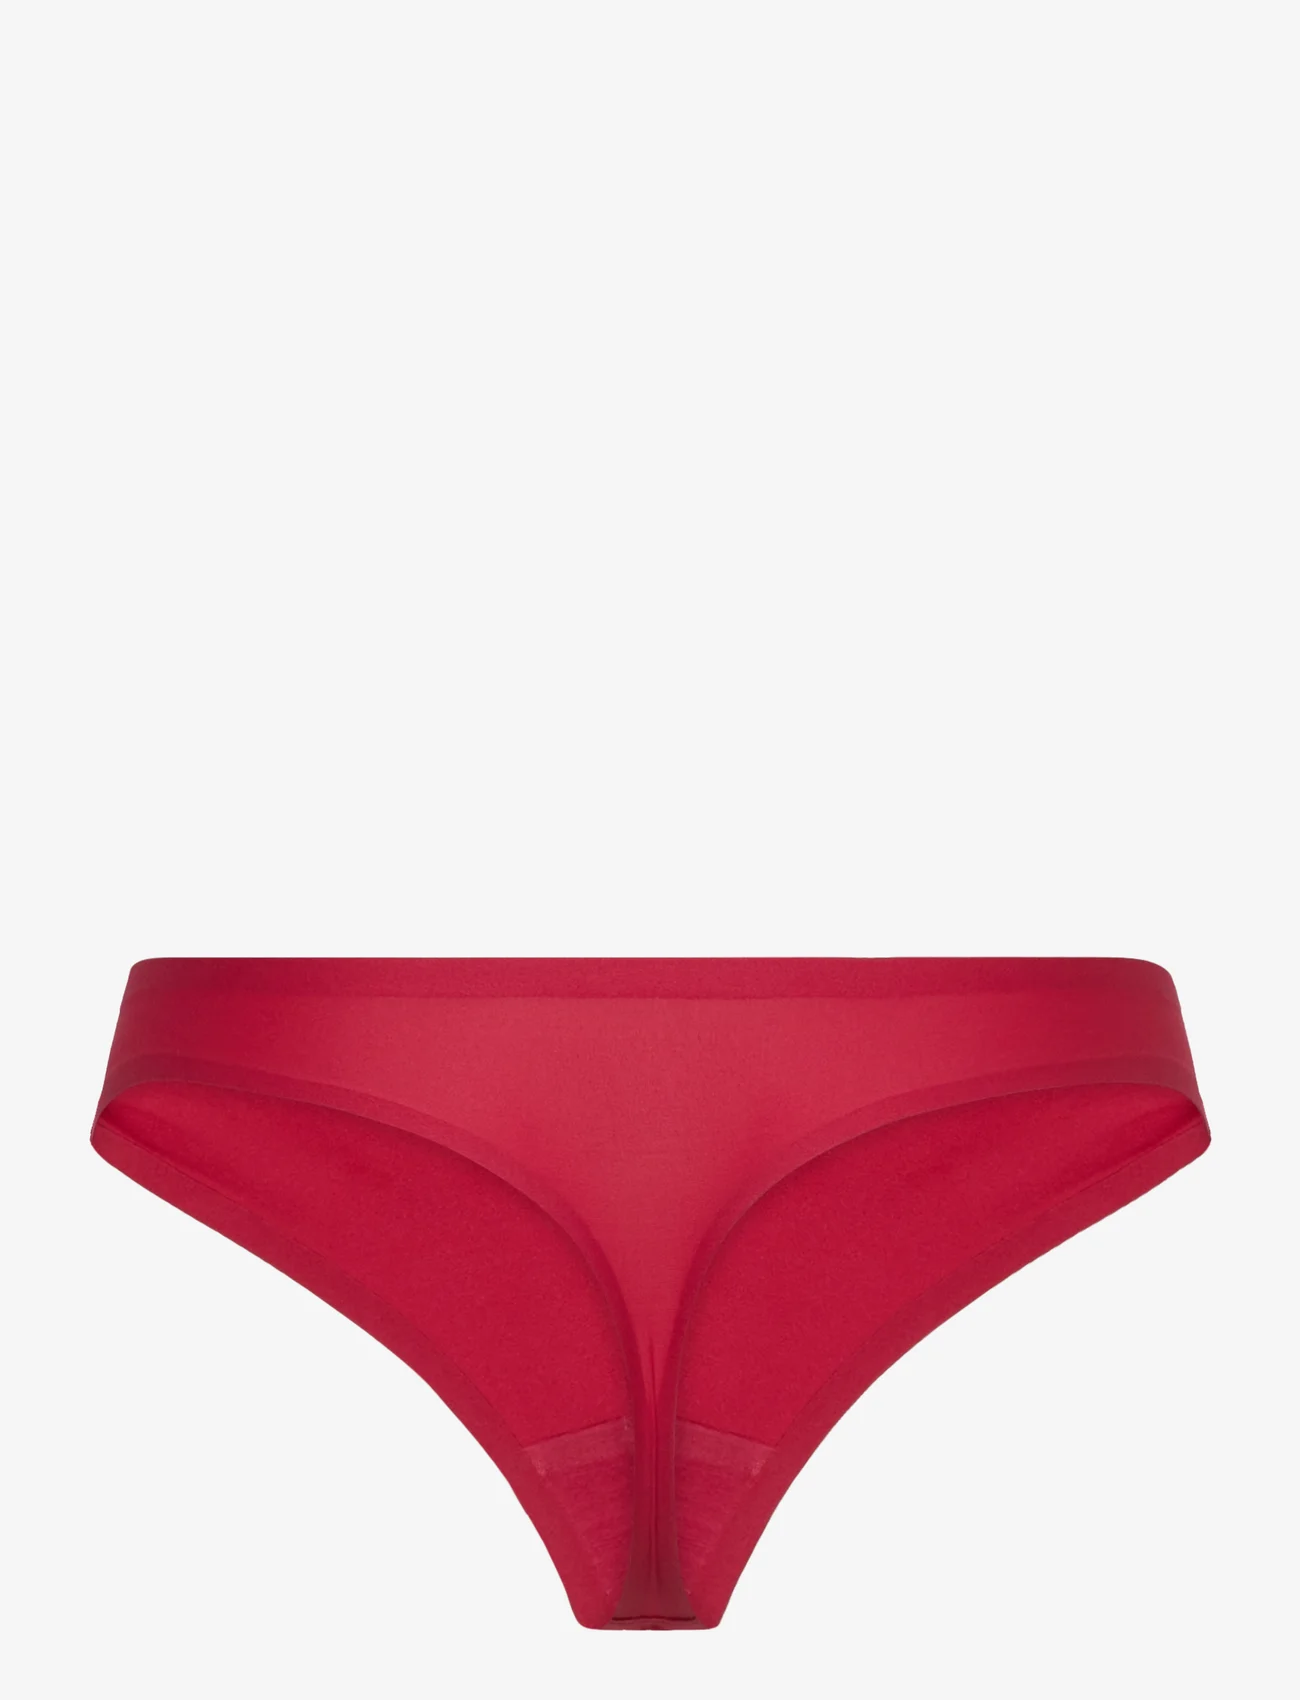 CHANTELLE - Softstretch Thong - sømløse truser - passion red - 1